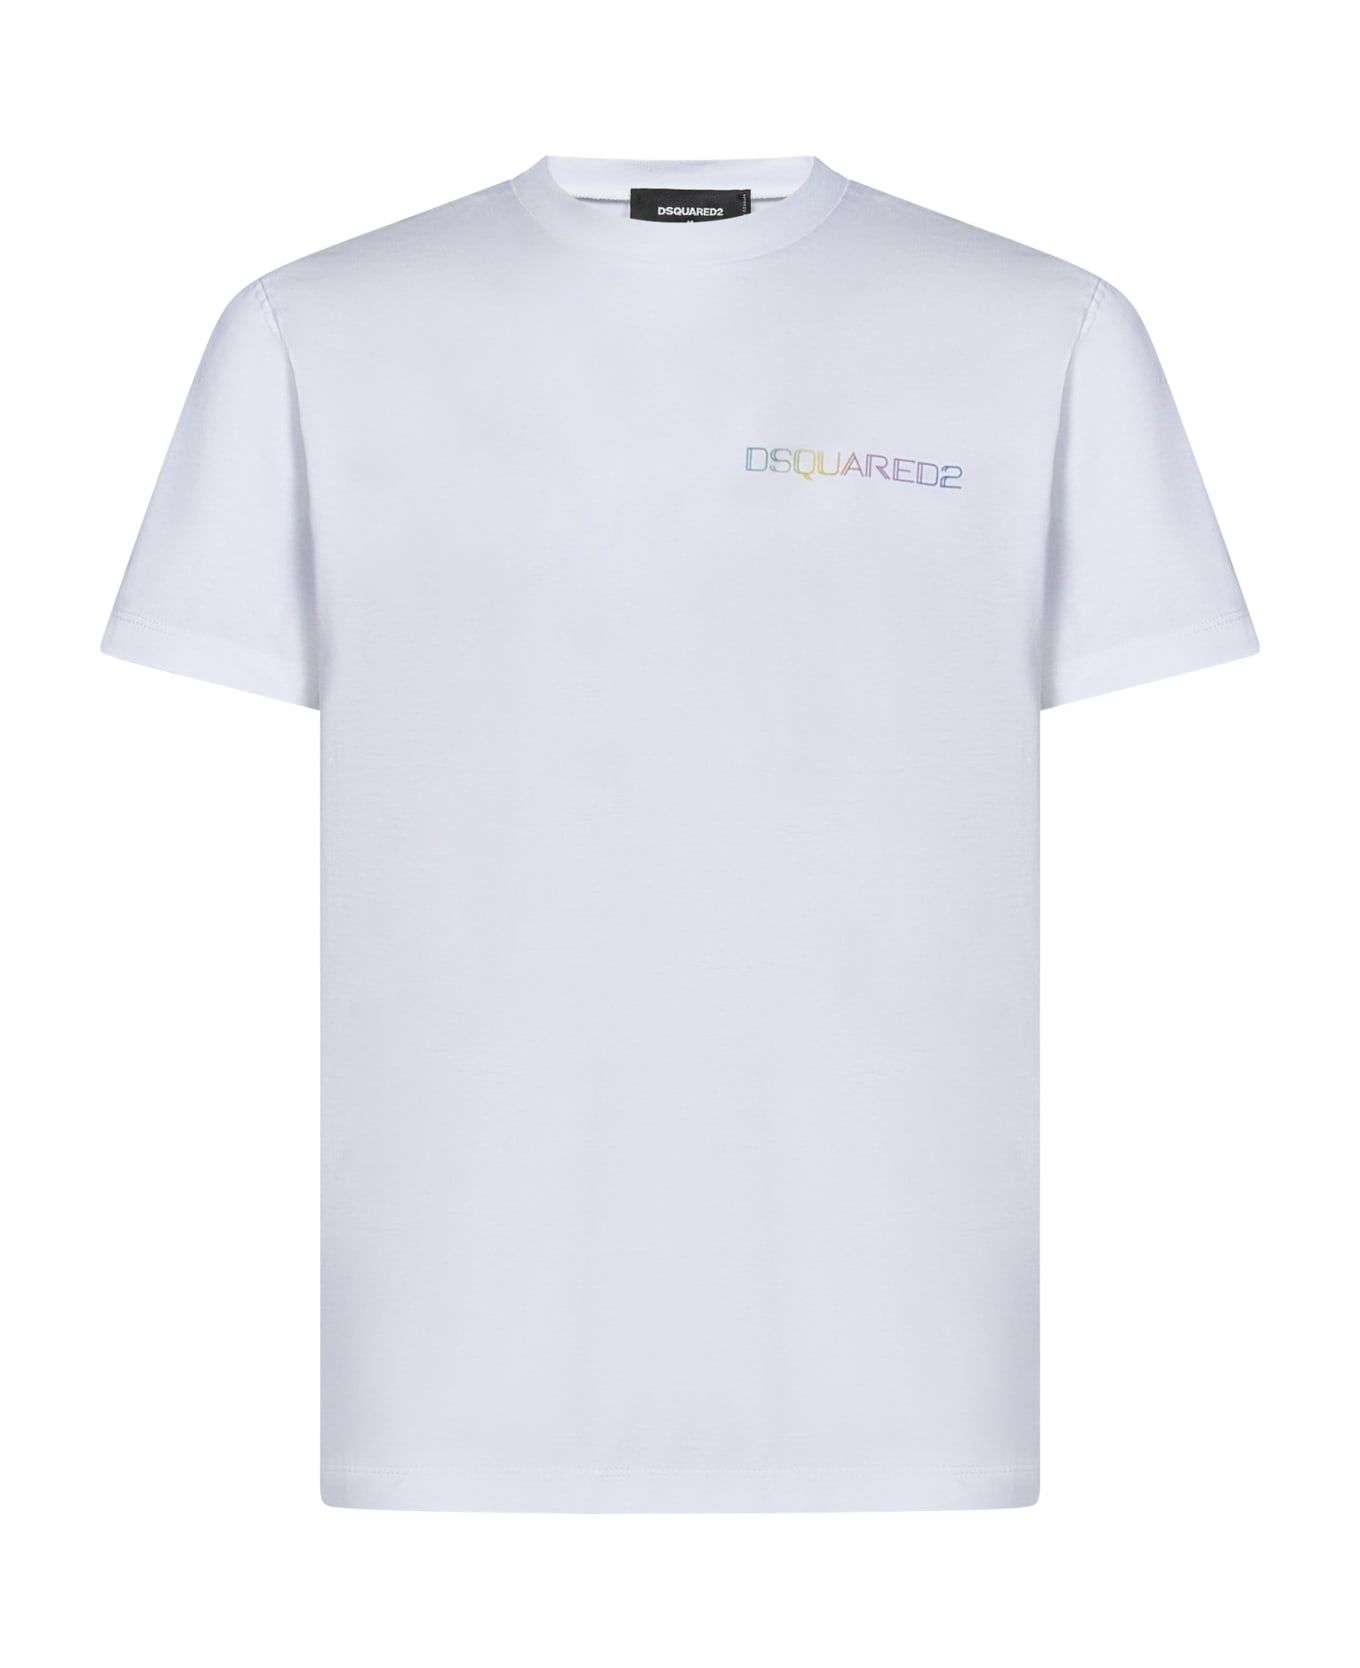 Dsquared2 Palm Beach Cool Fit T-shirt - White シャツ